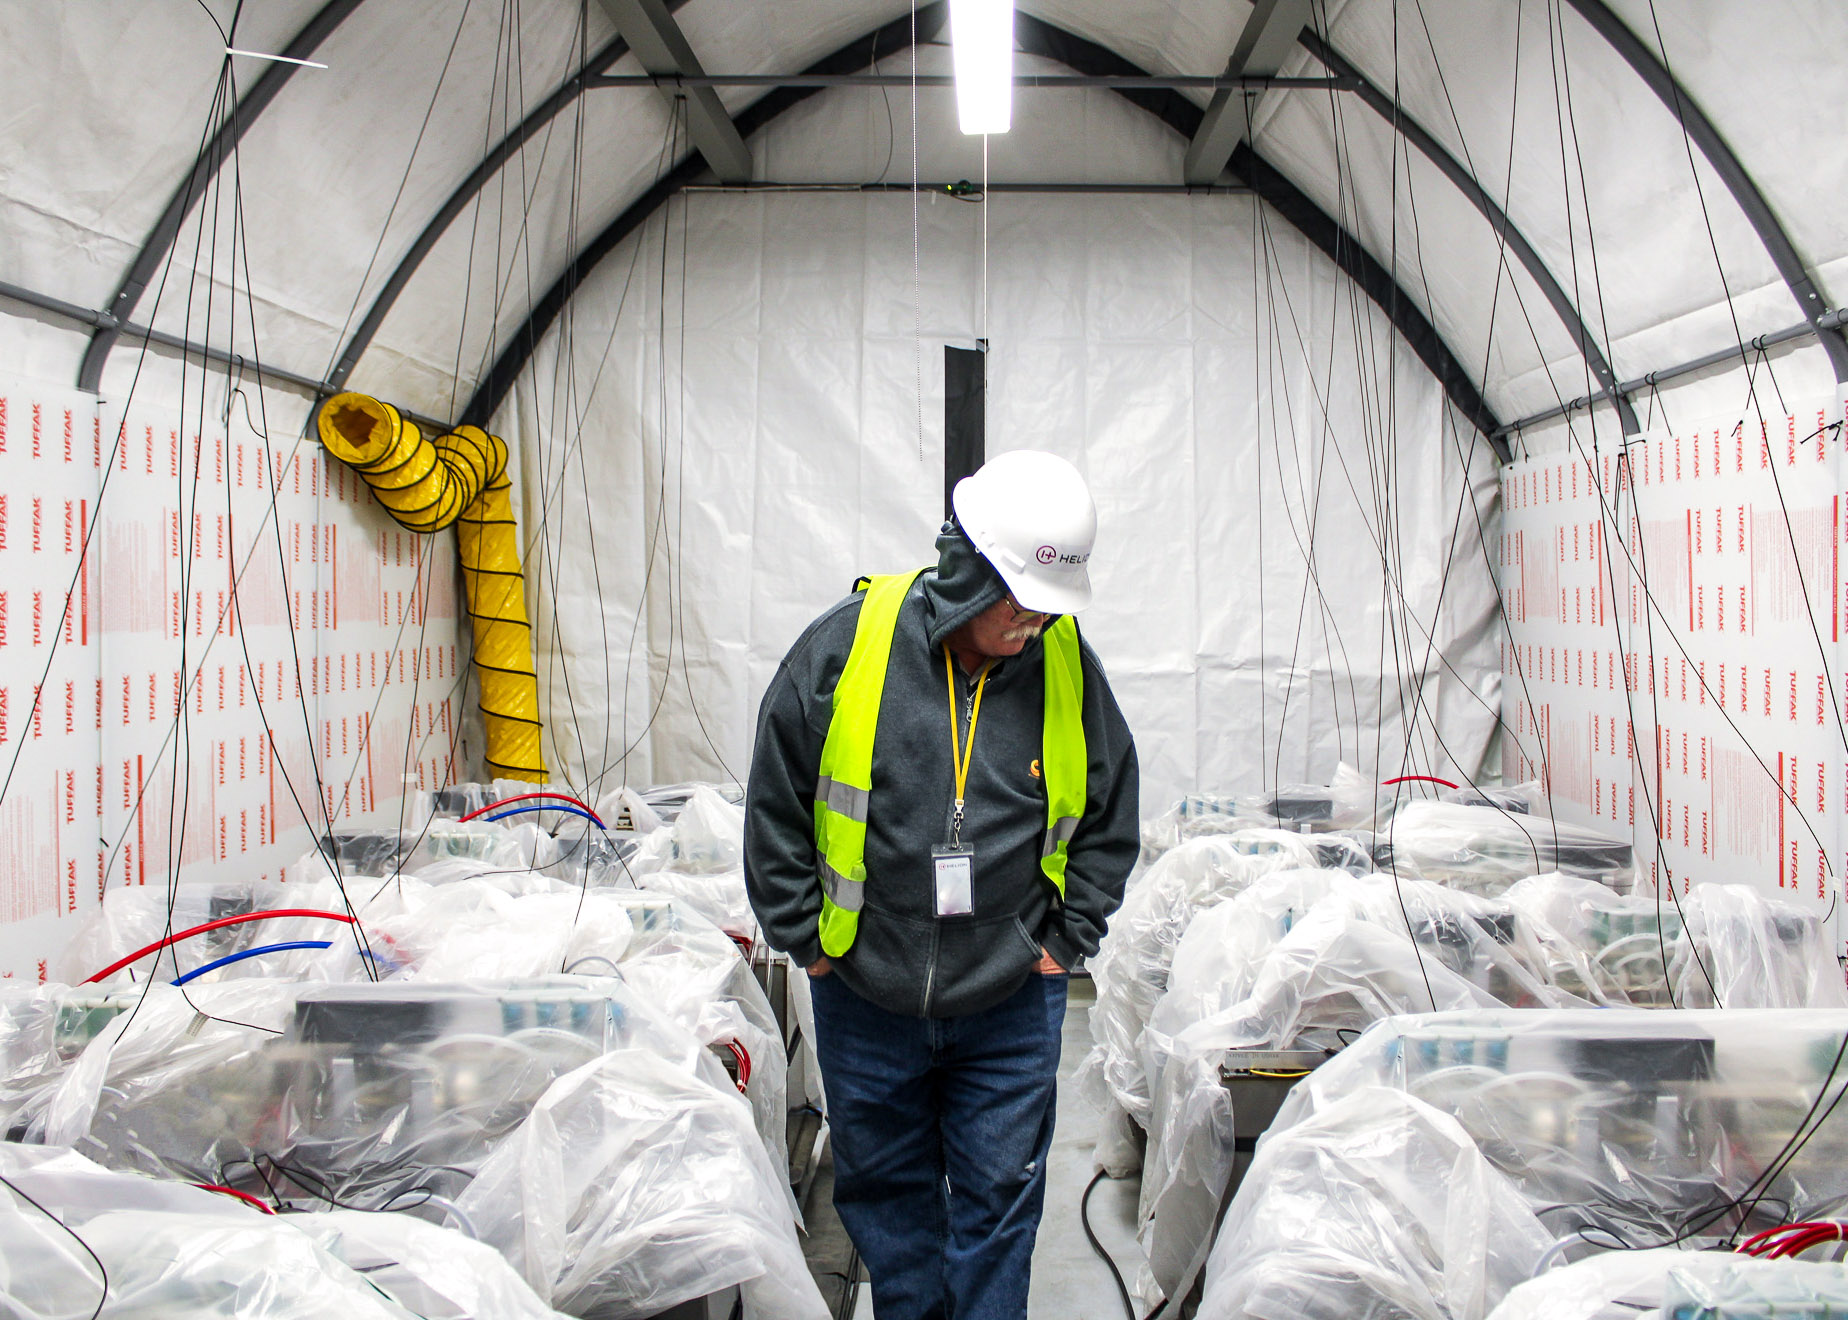 a worker in a Helion hard hat walked down an aisle surrounded by machinery covered in plastic sheeting